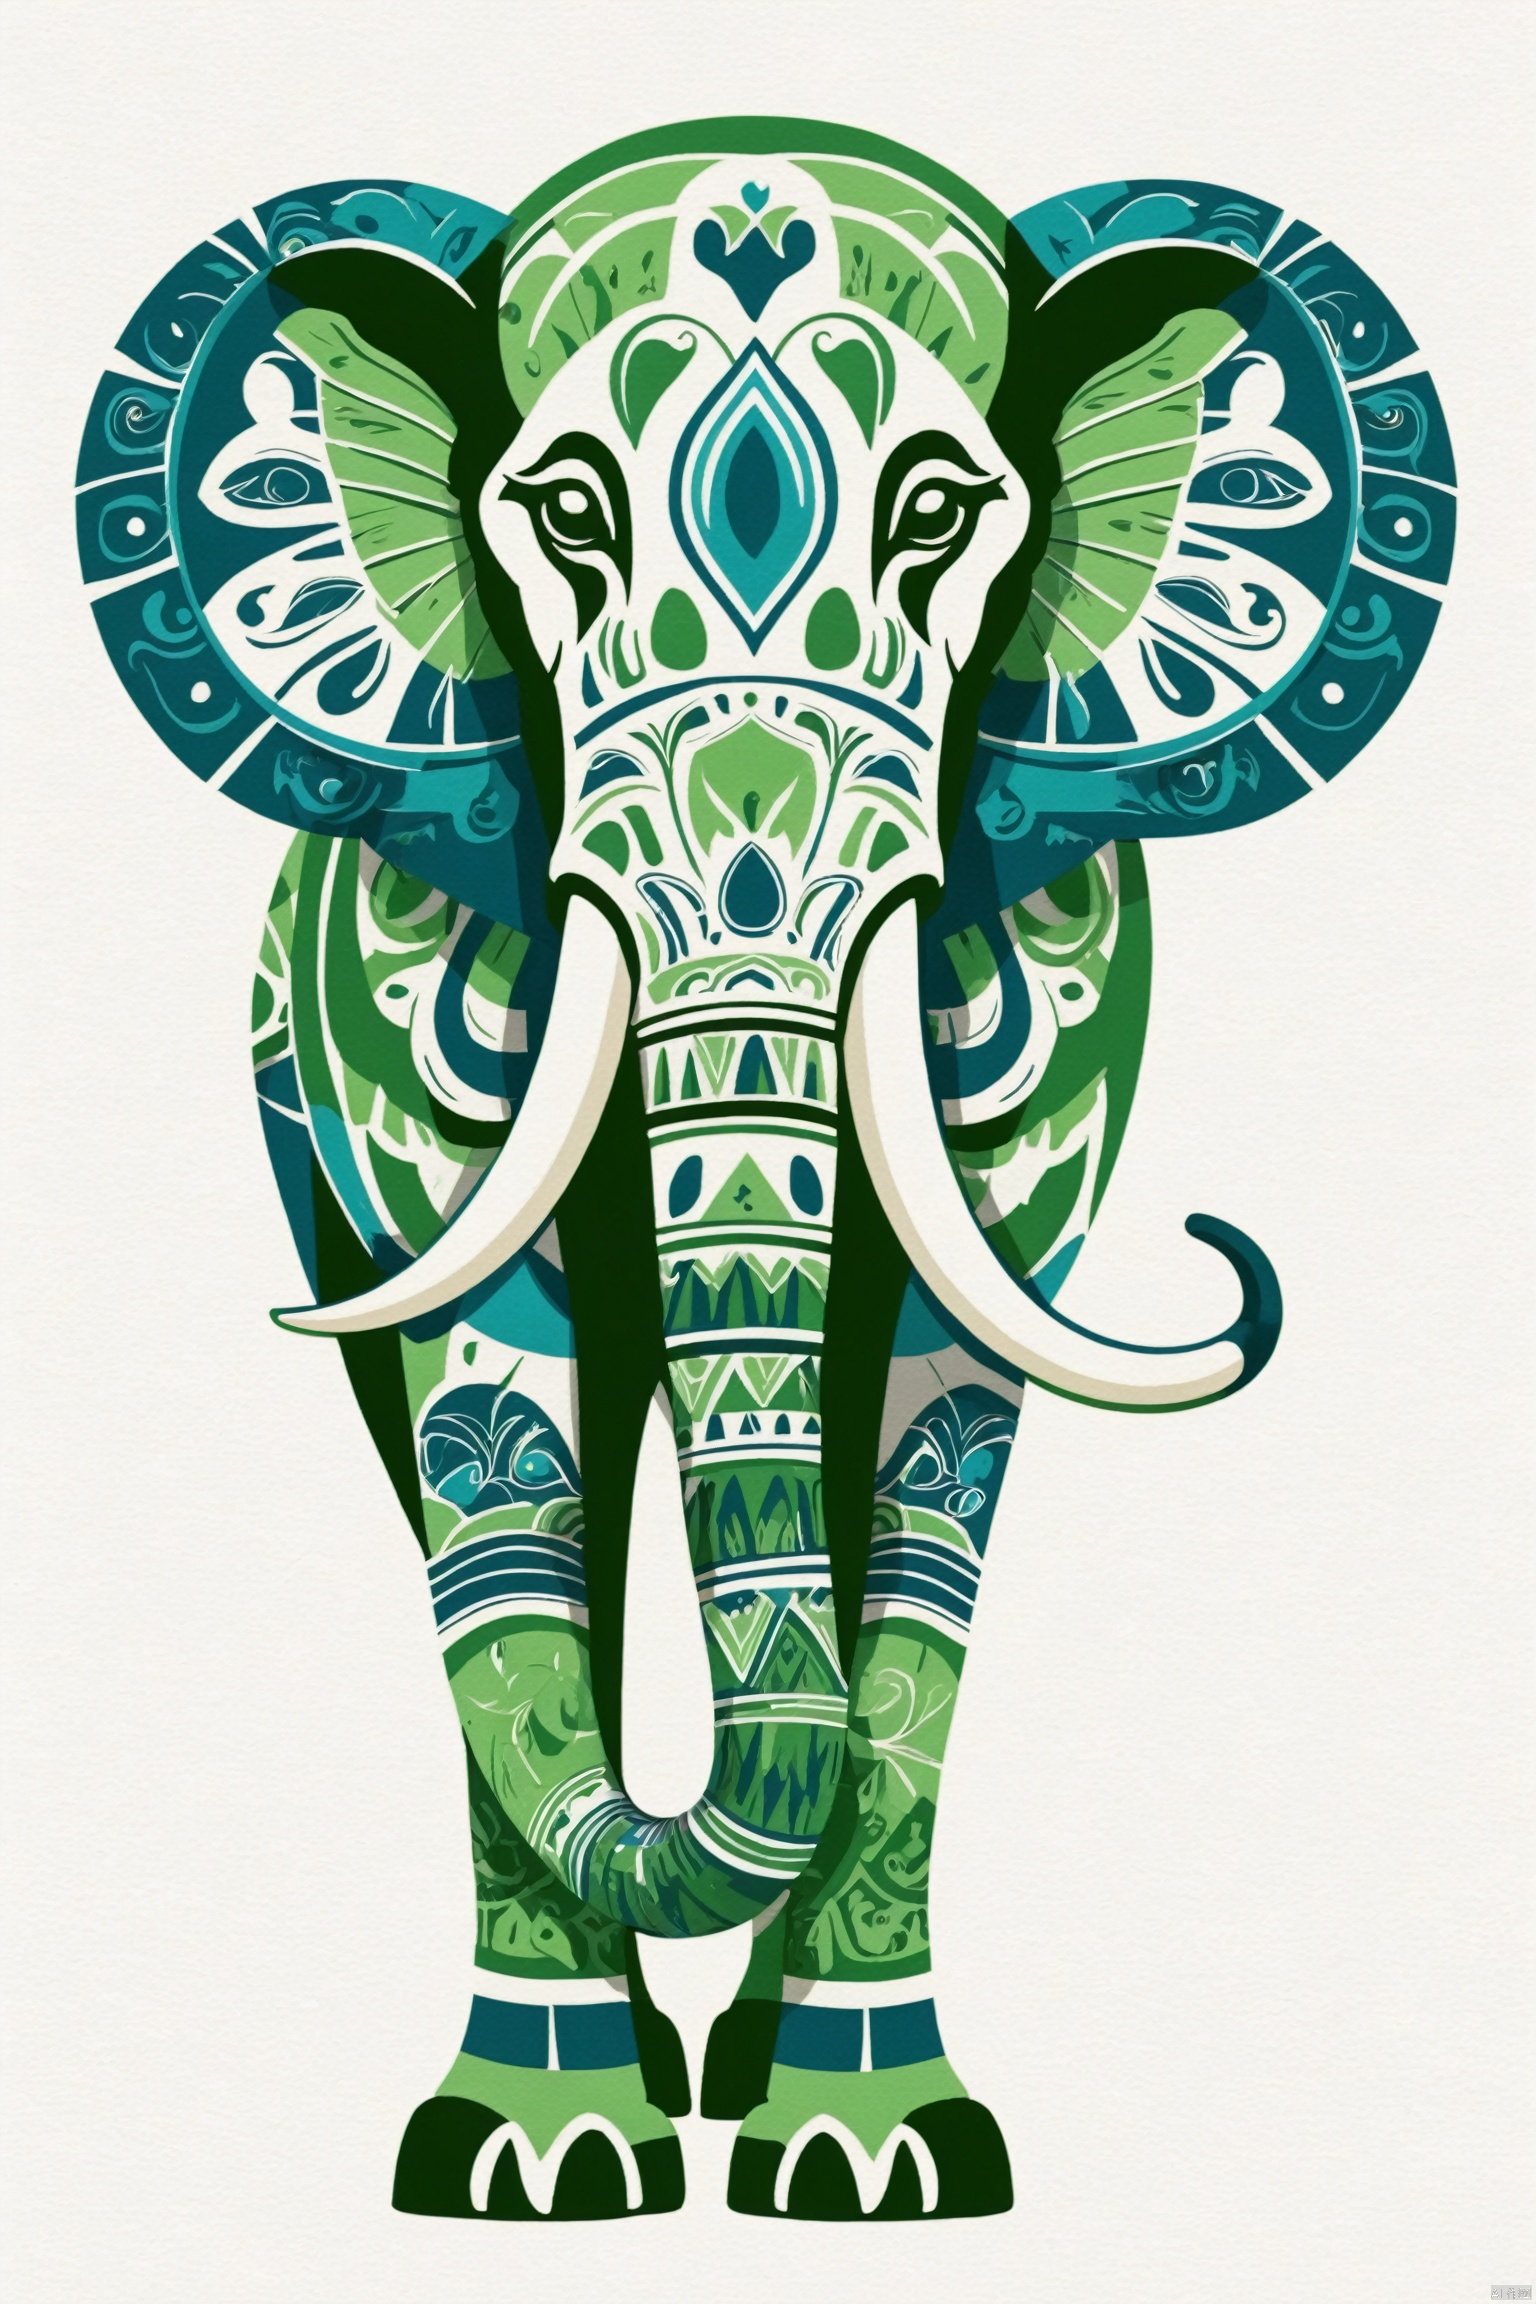 Totem pattern of a huge green mammoth,native american animal totem design in the style of Emily Balivet, symmetrical logo, white background, green and blue color palette